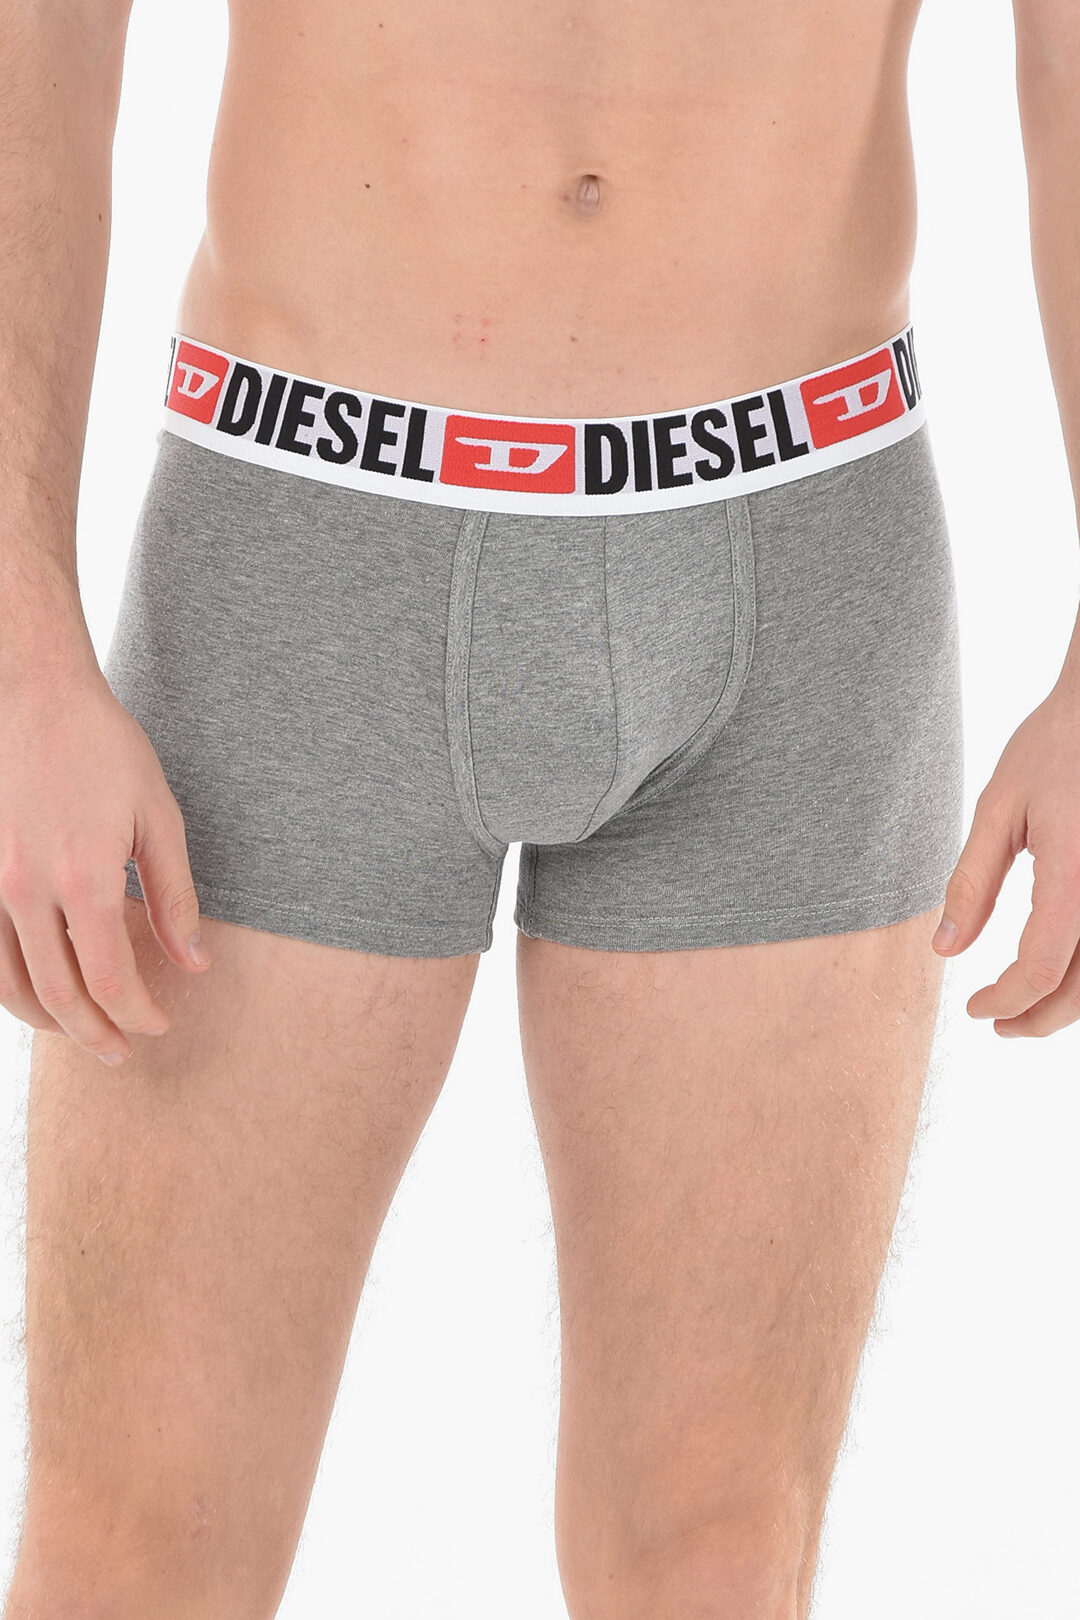 Diesel Logoed at the Waist UMBX-DAMIEN 3 Pairs of Boxers Set men - Glamood  Outlet